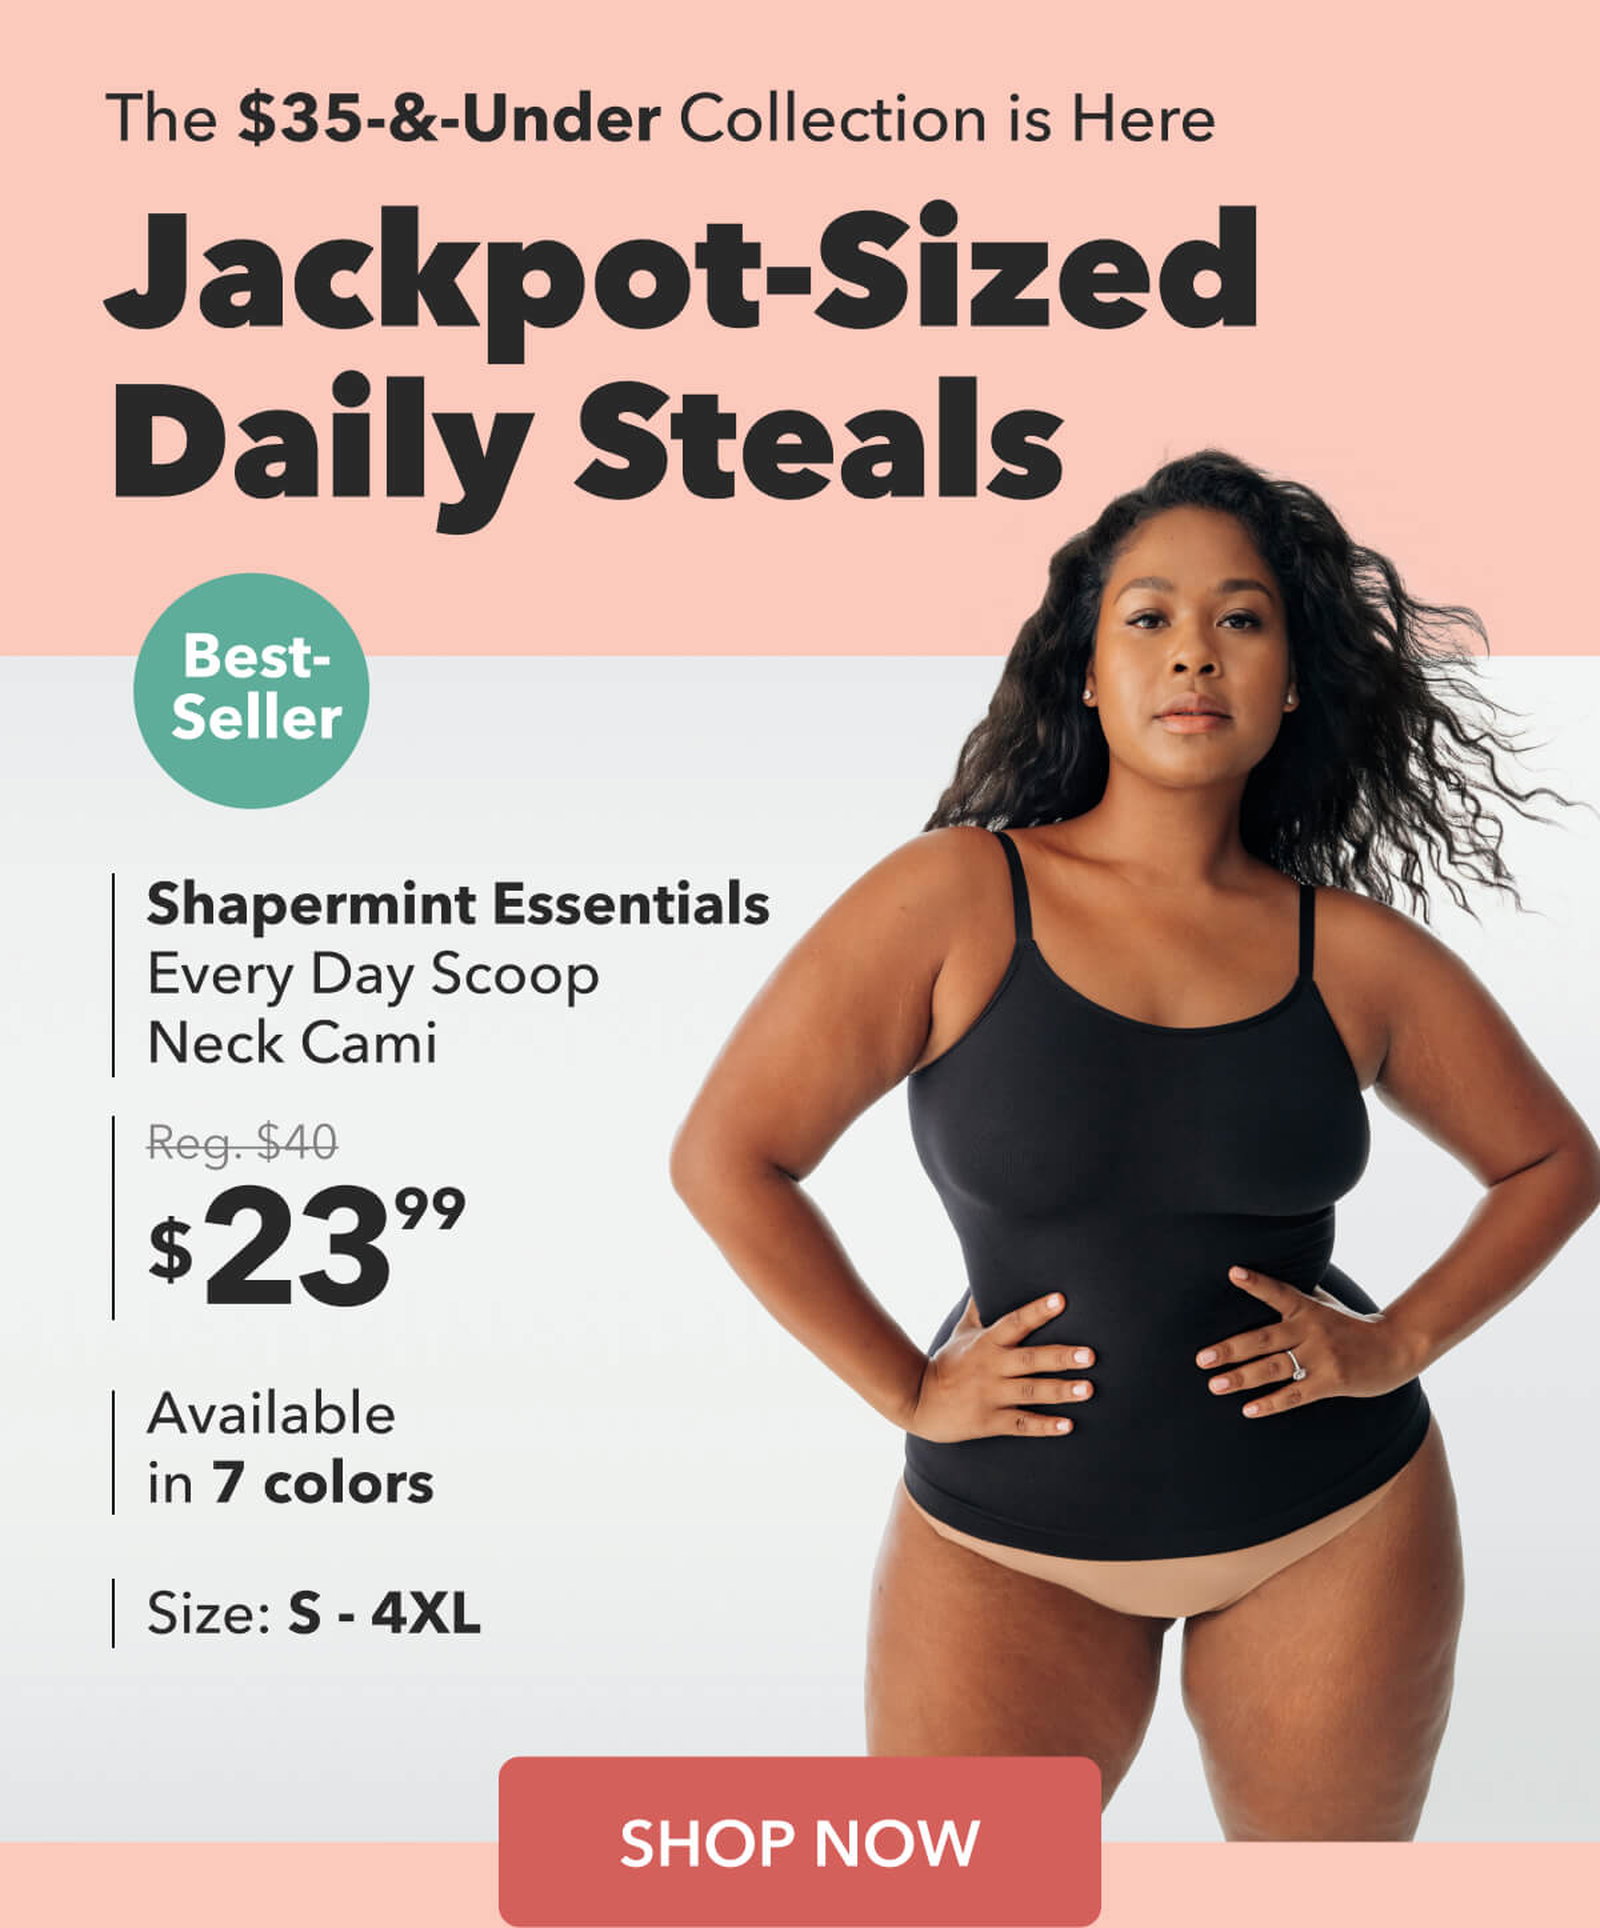 Check out our Shapermint Essentials All Day Every Day Scoop Neck Cami